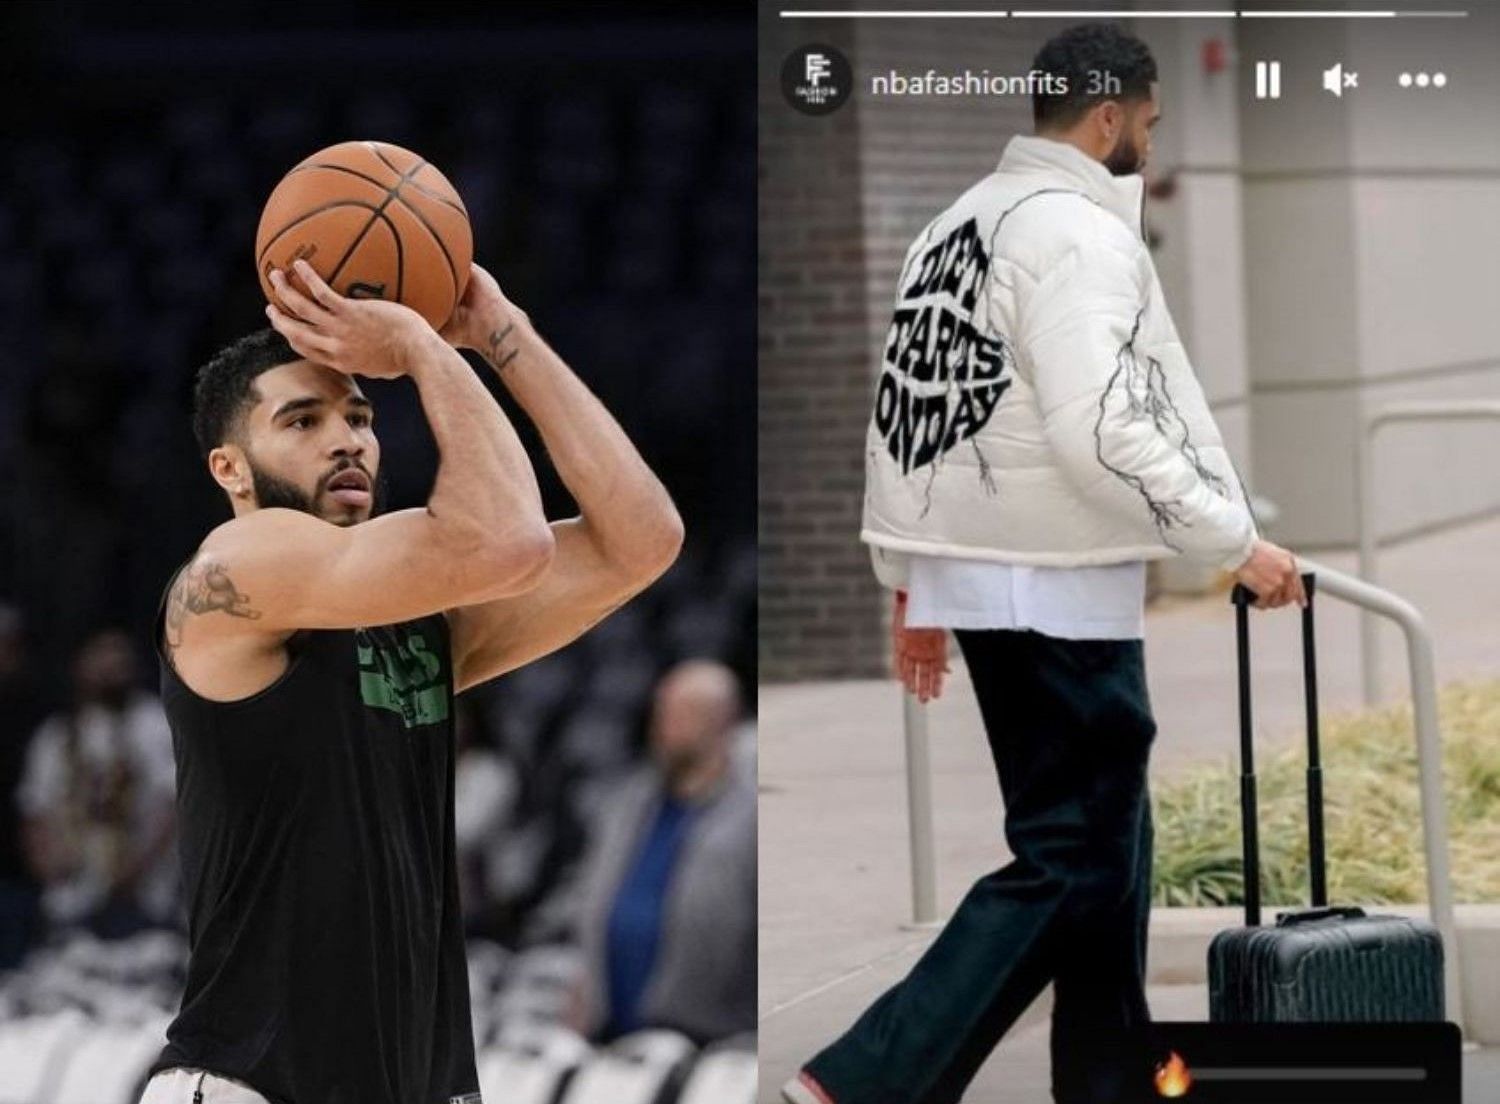 Boston Celtics All-Star Jayson Tatum was spotted wearing a $300 jacket ahead of their clash with the OKC Thunder on Tuesday.